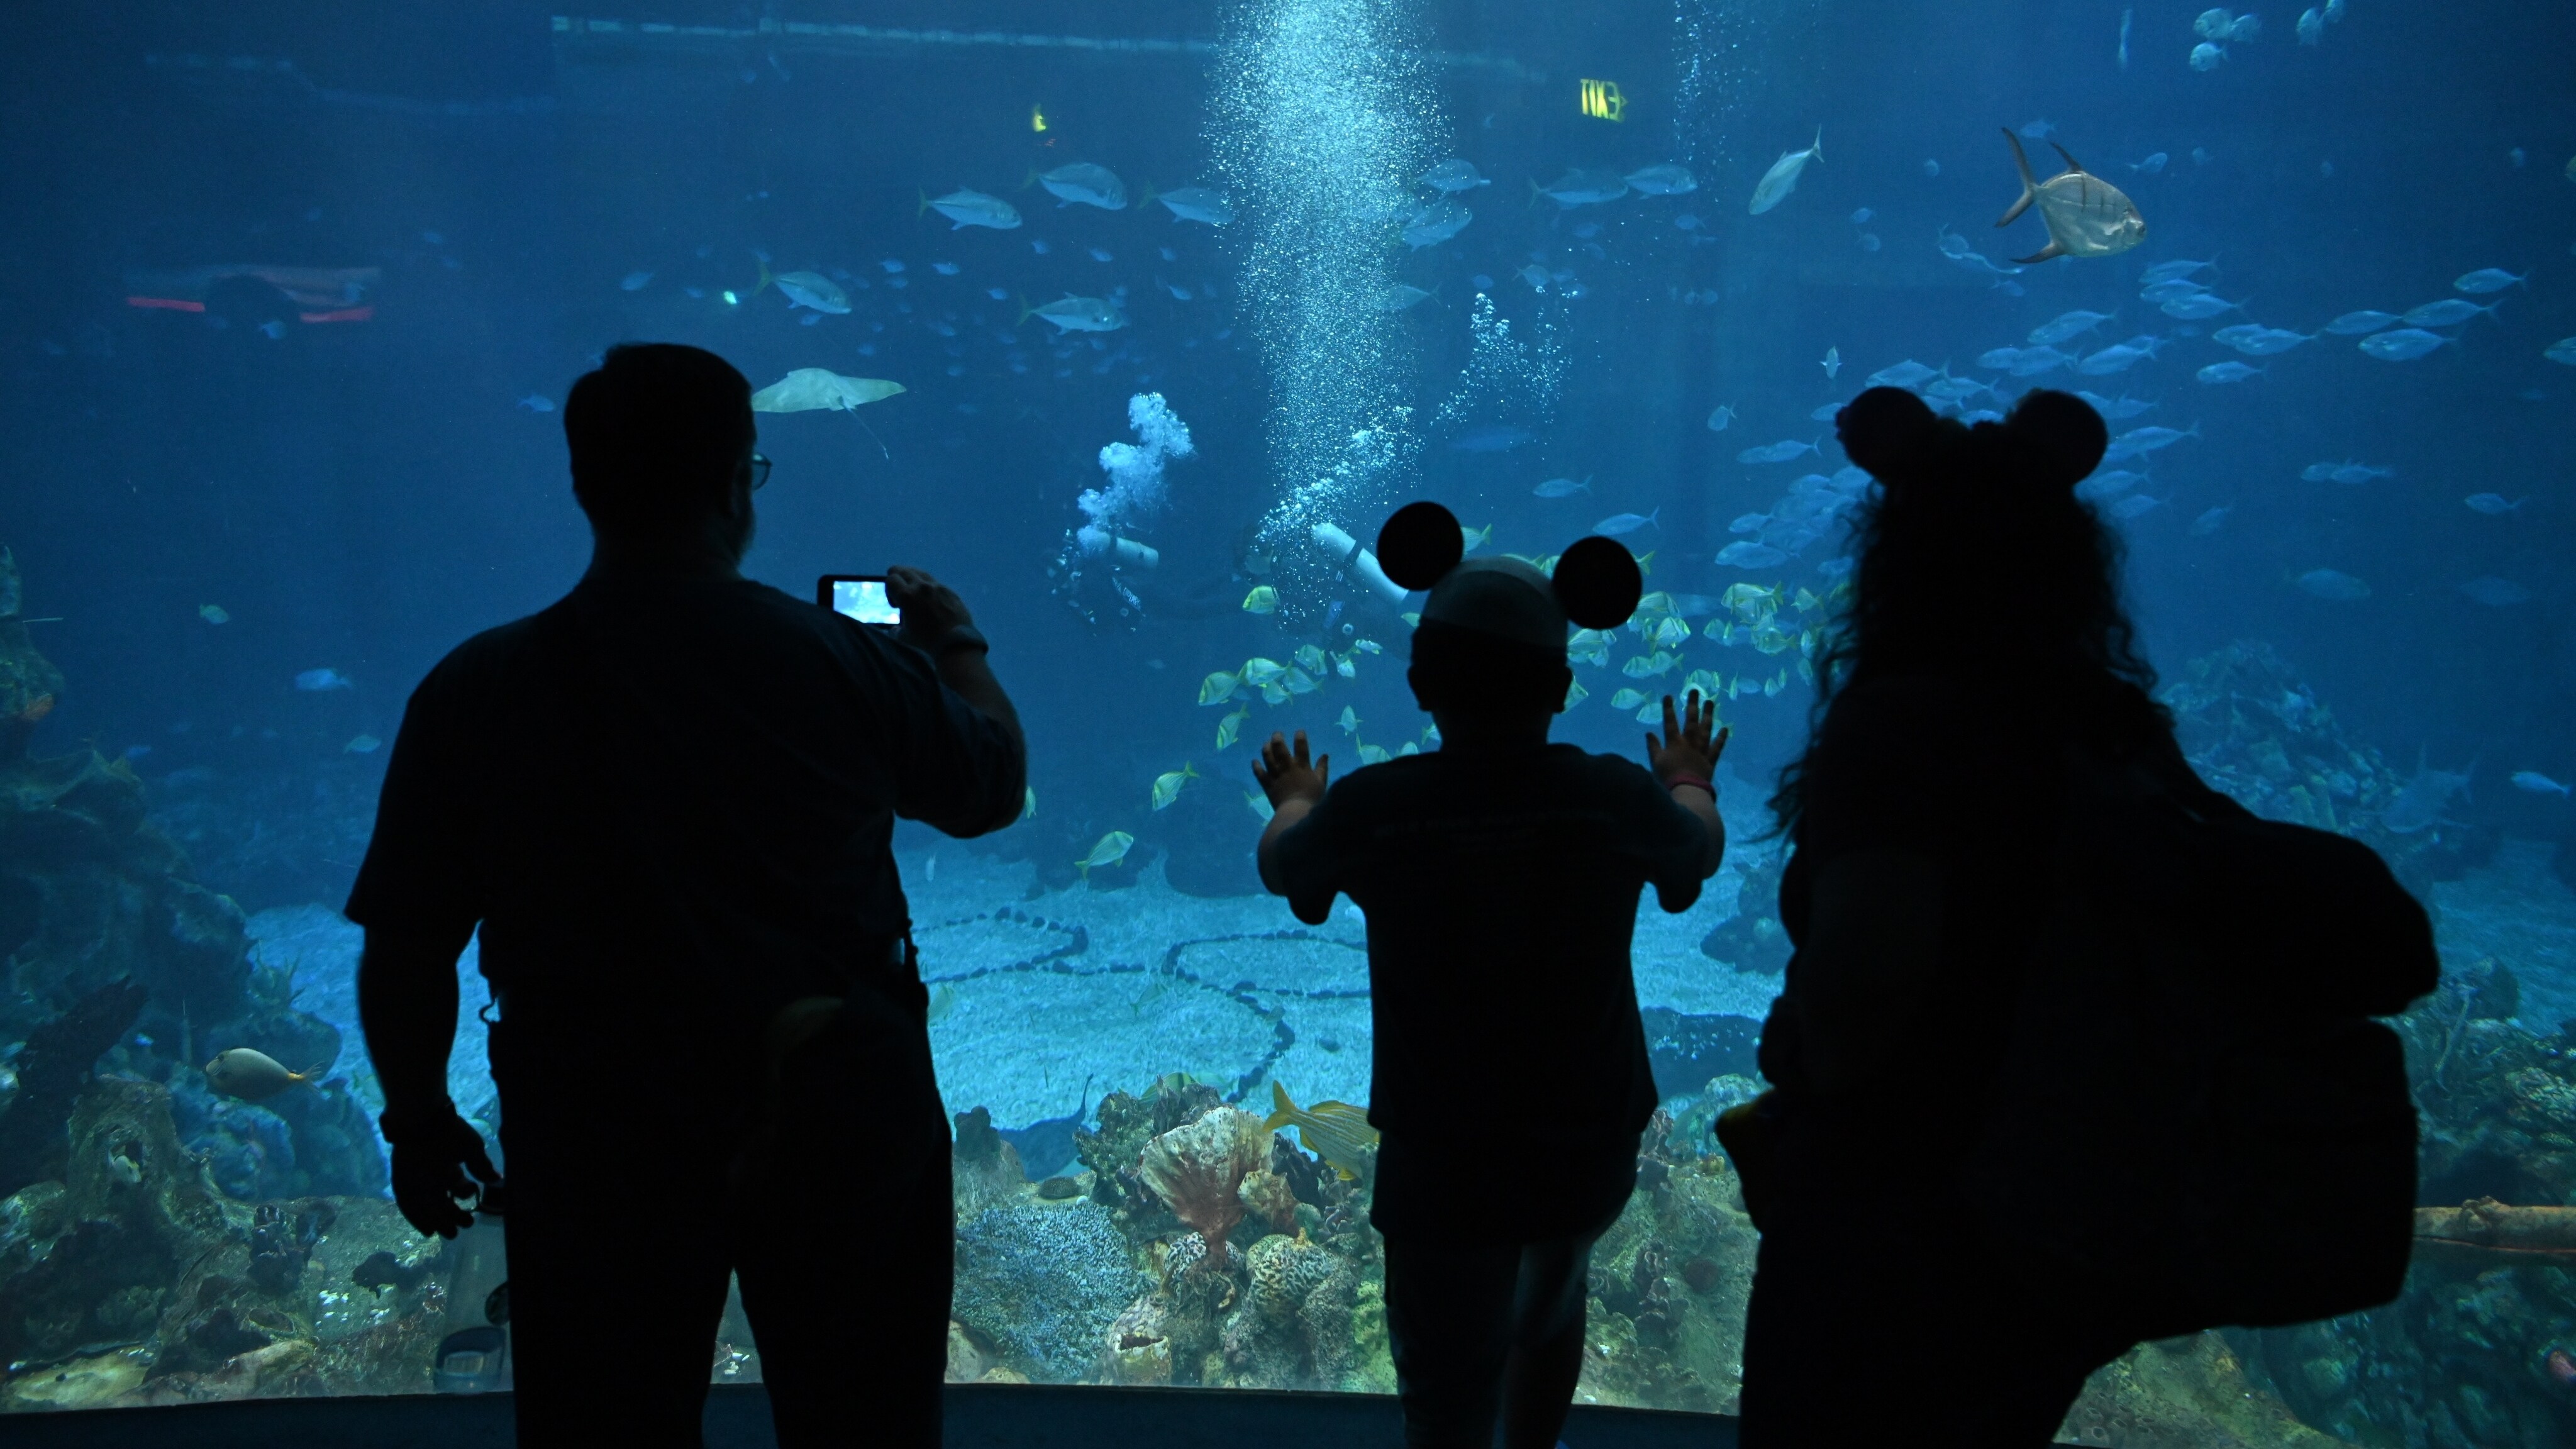 Guests look into the aquarium at The Seas with Nemo & Friends. (National Geographic/Gene Page)